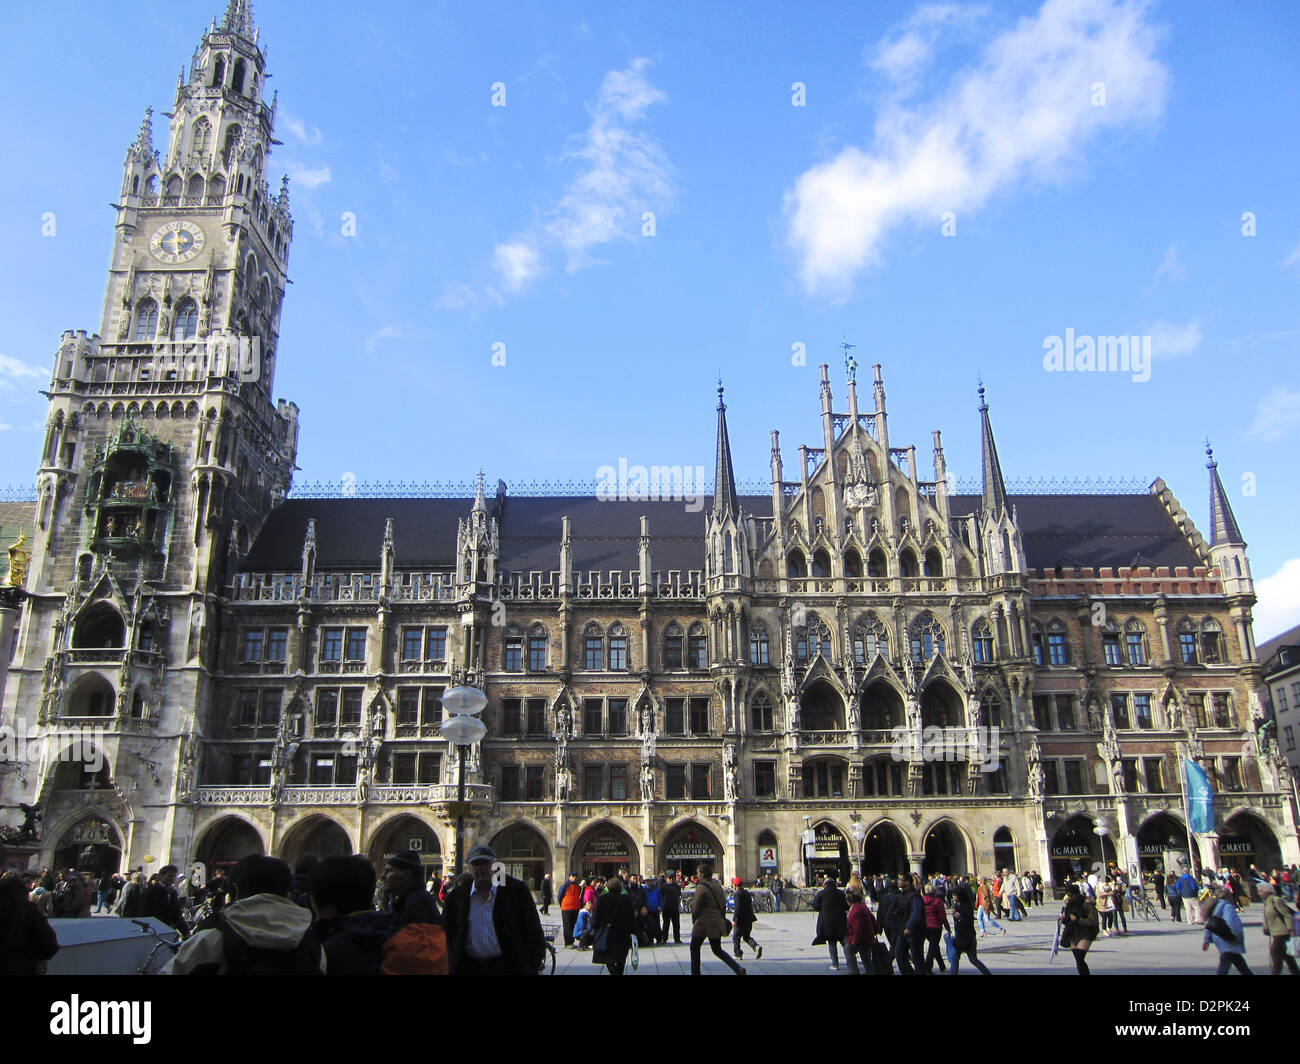 Neues Rathaus (New Town Hall) in Munich, Germany Stock Photo